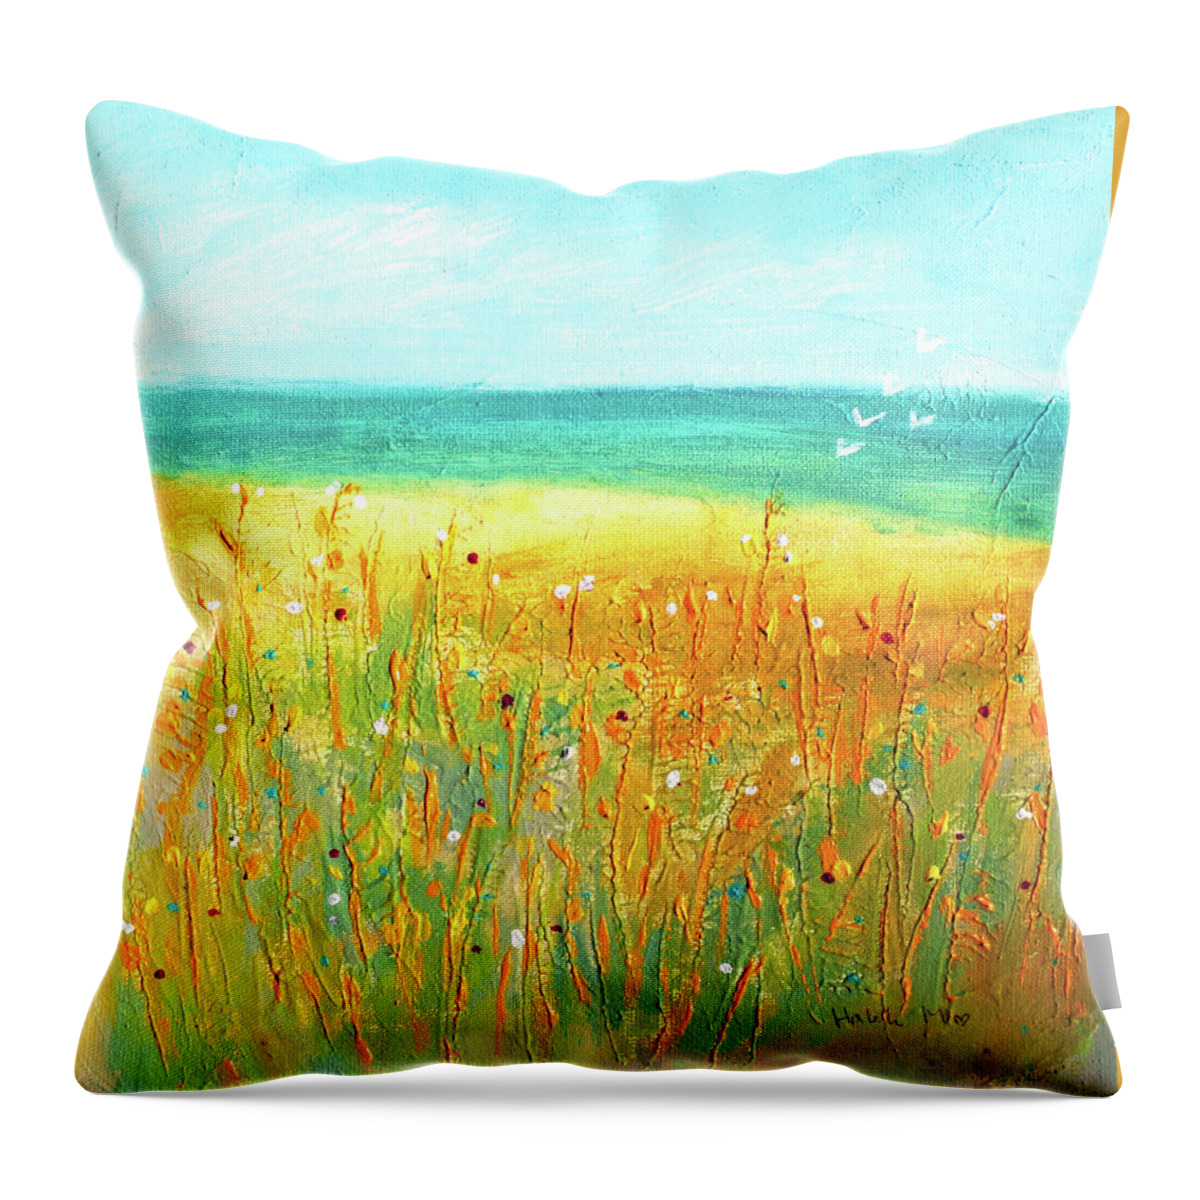 Halehlandscape Throw Pillow featuring the painting Be Happy For This Moment by Haleh Mahbod